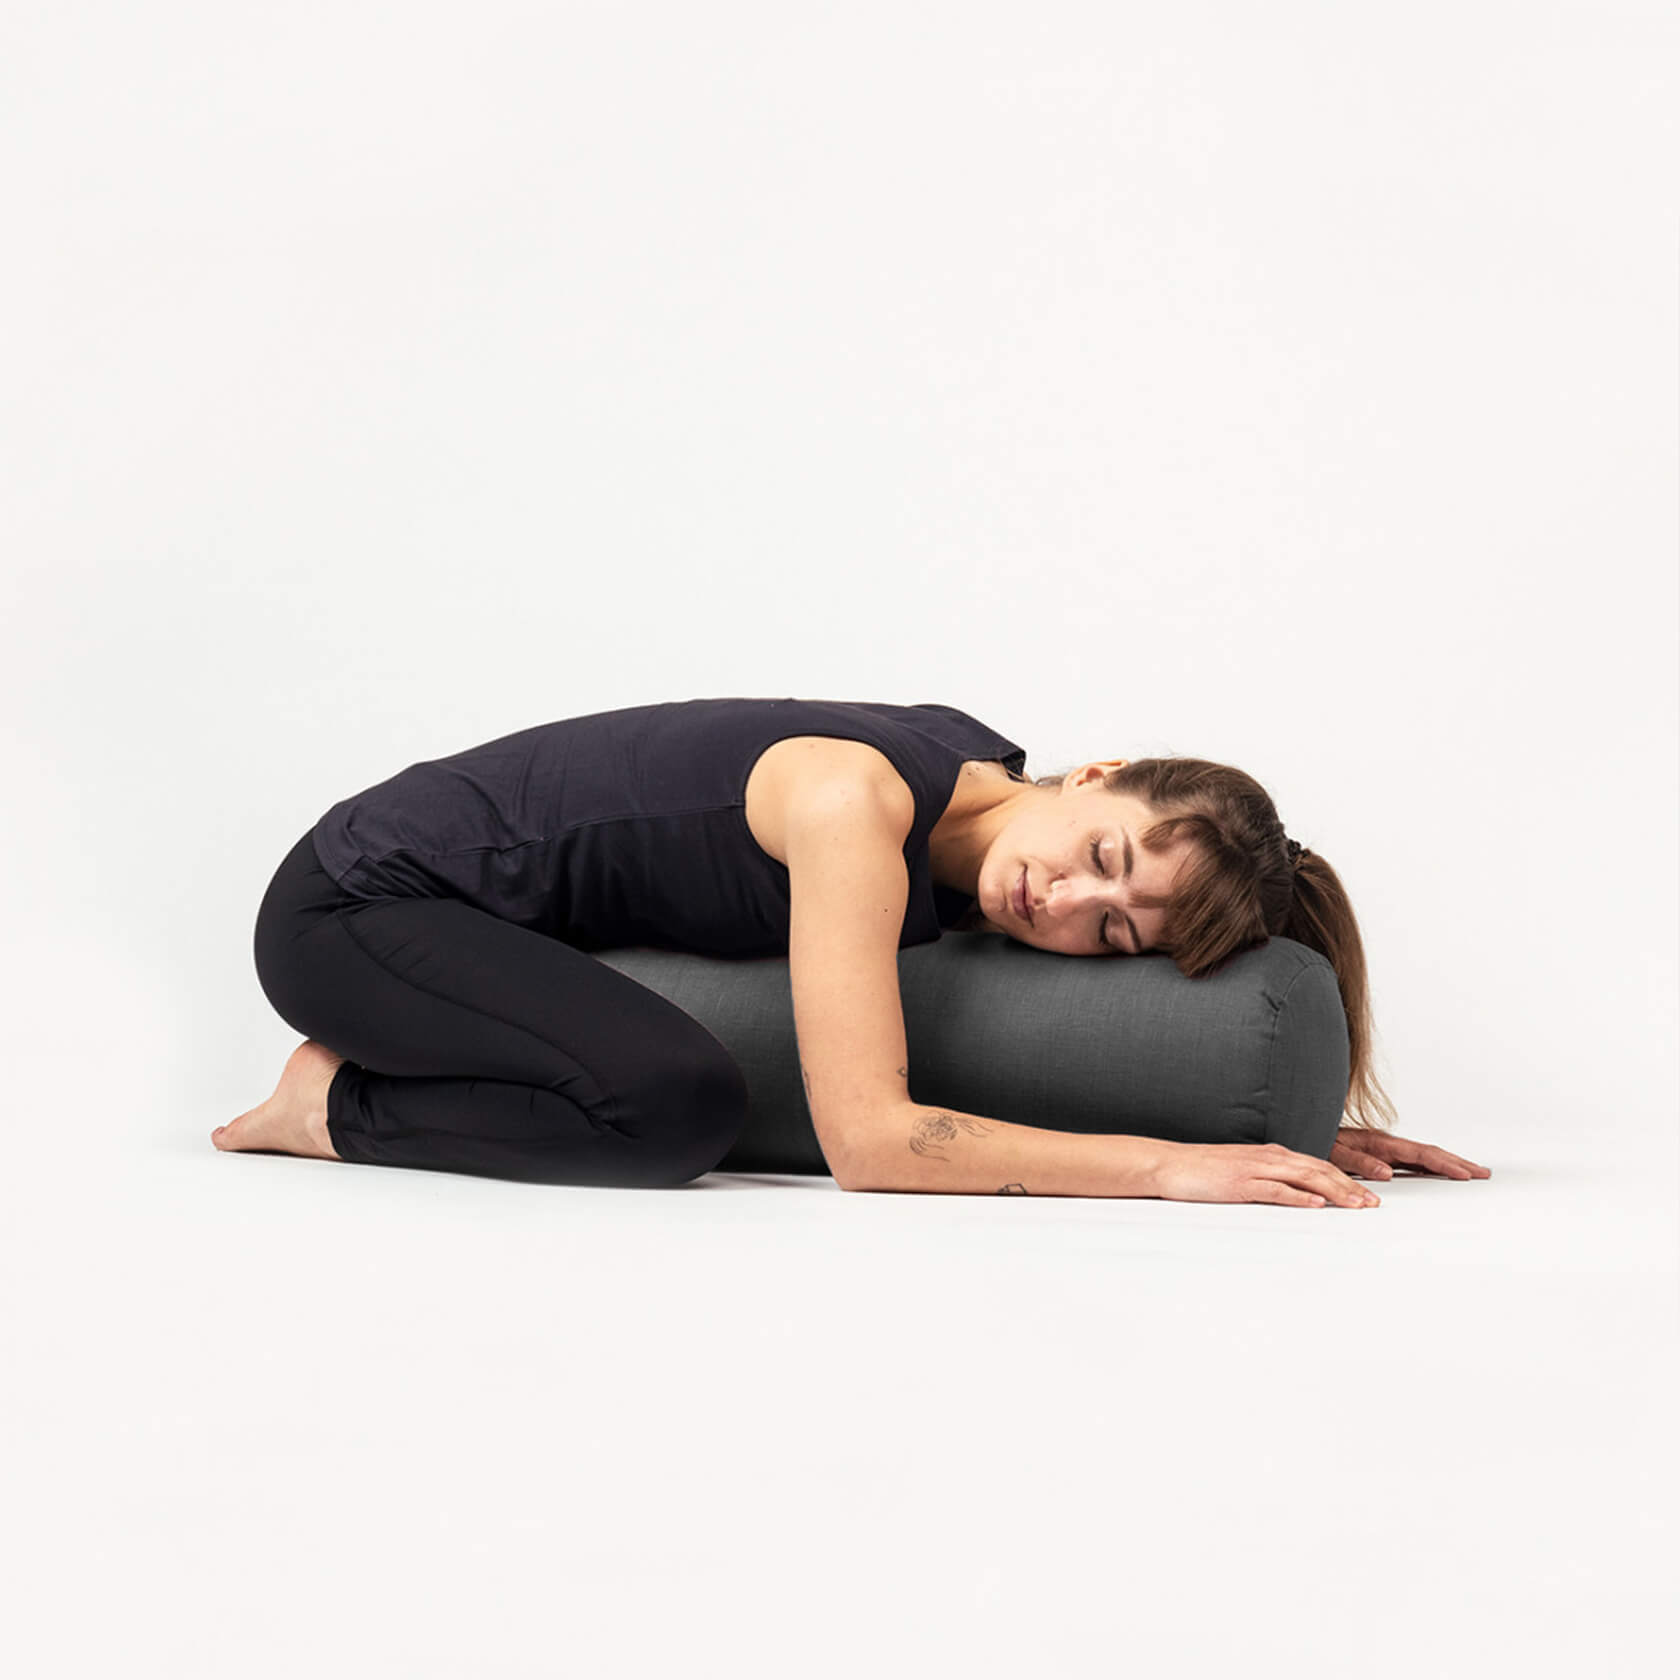 7 Restorative Yoga Poses to Relax Your Mind and Body - Yoga with Rona